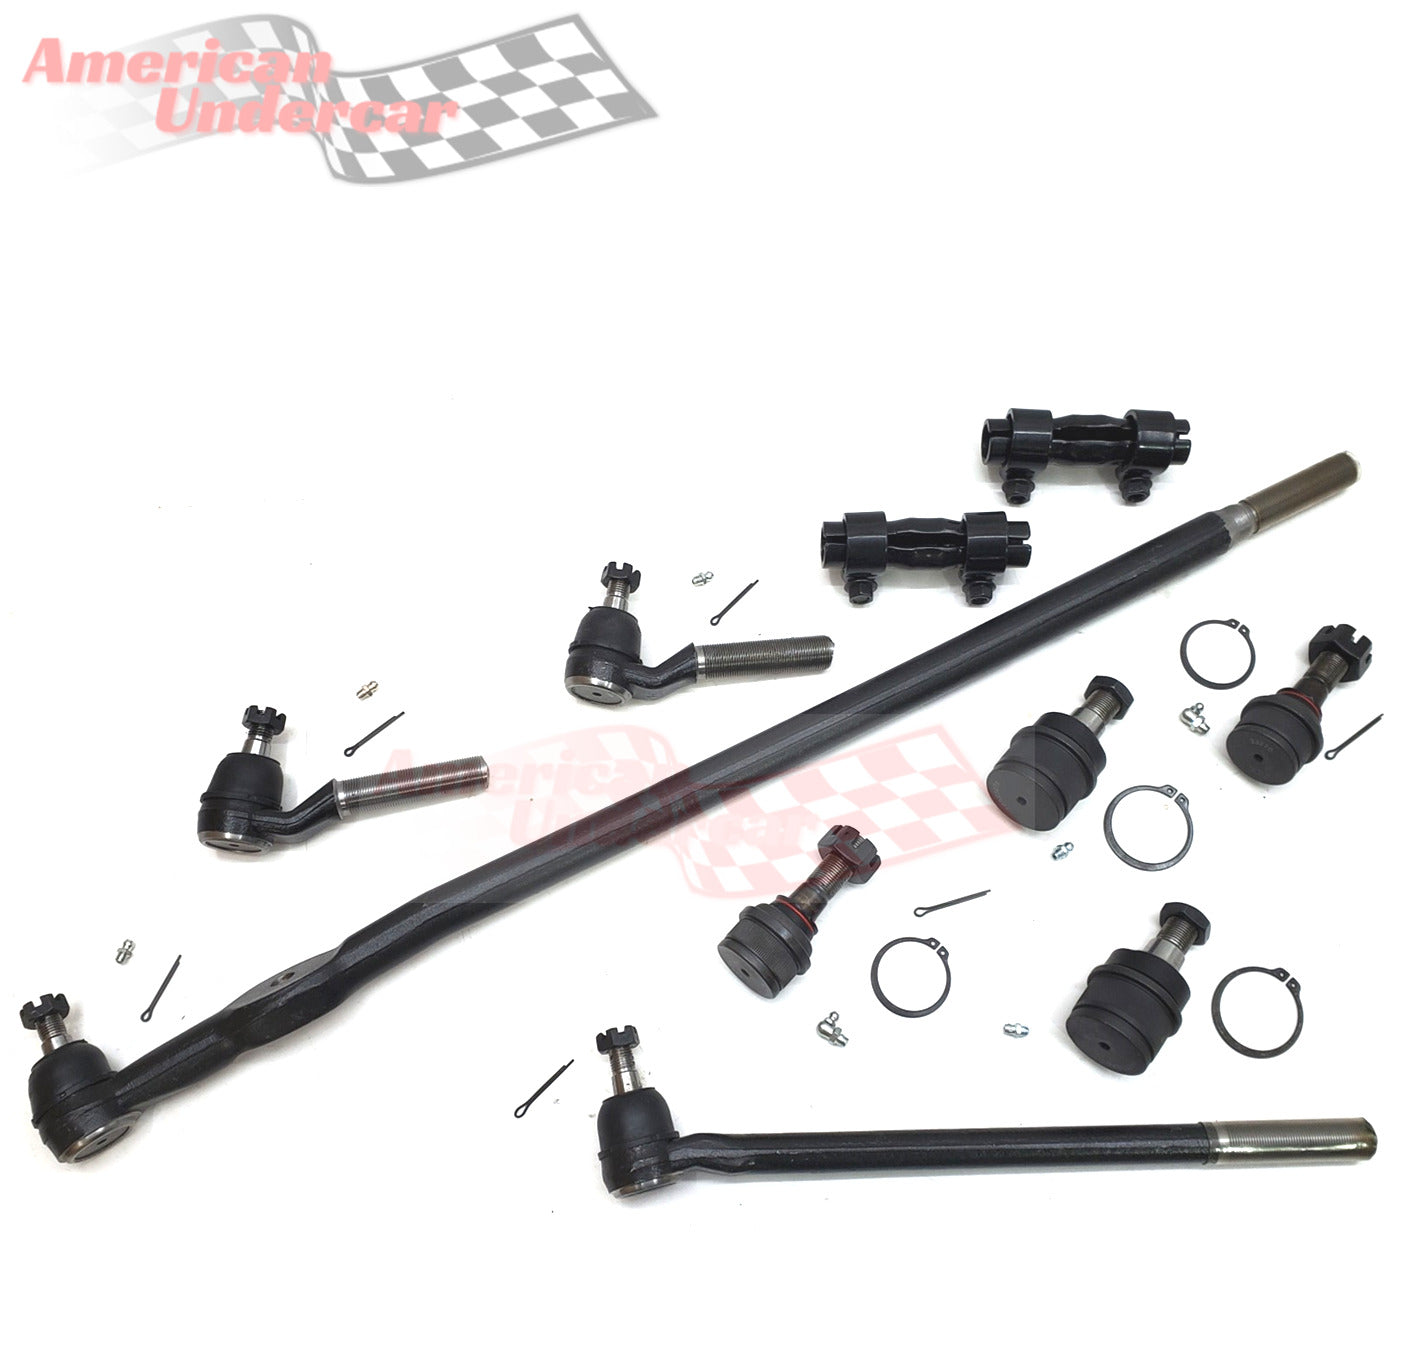 XRF Ball Joint Tie Rod Drag Link Steering Kit for 1985-1994 Ford F250 4x4 3850lb Axle